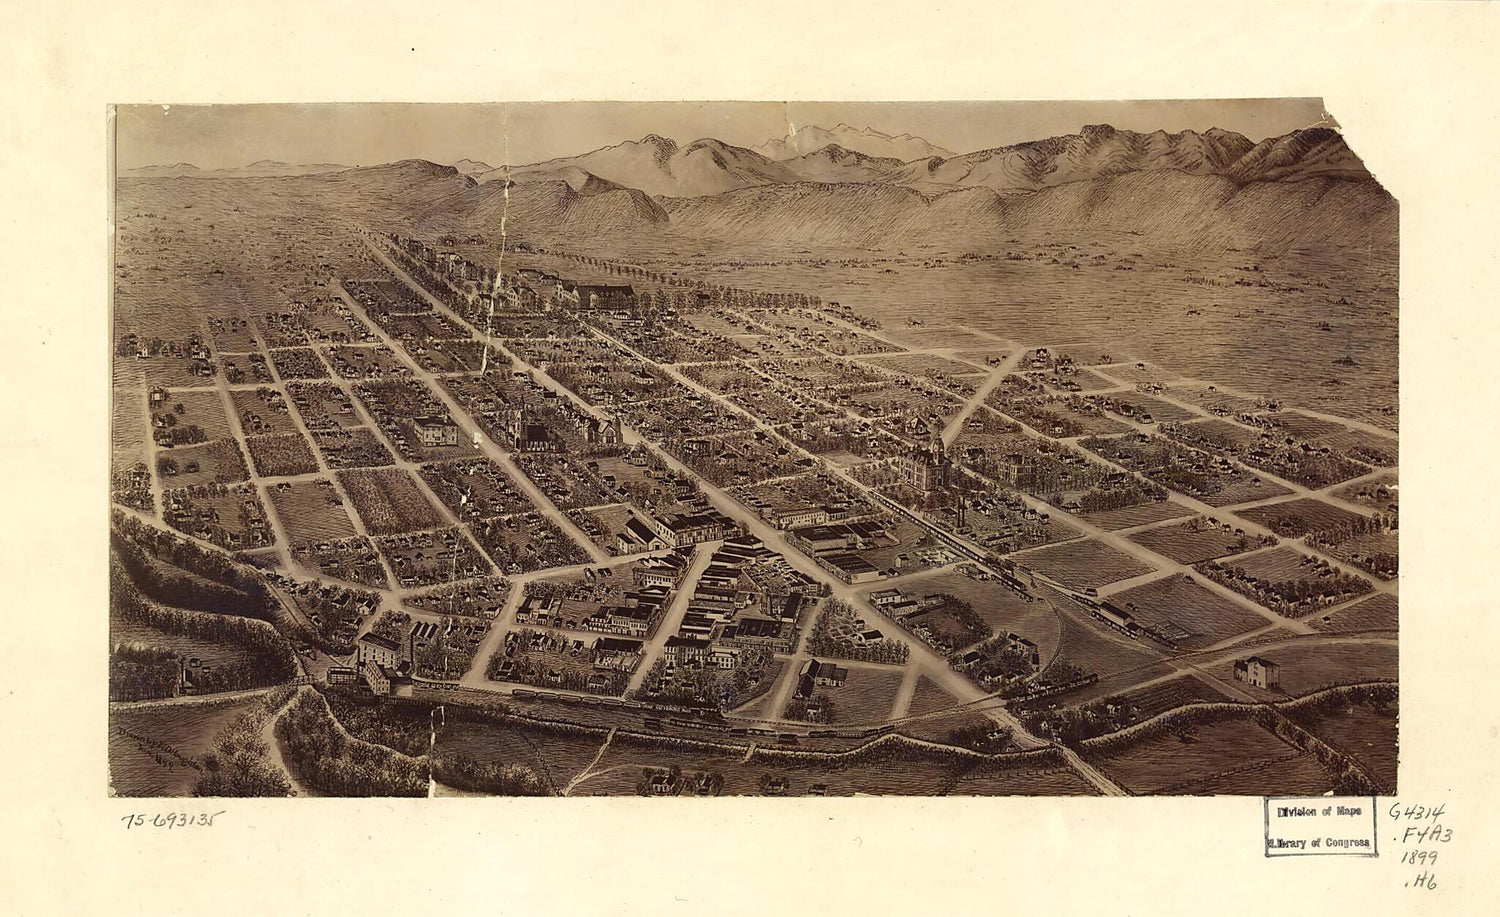 This old map of Fort Collins, Colorado from 1899 was created by Merritt Dana Houghton in 1899